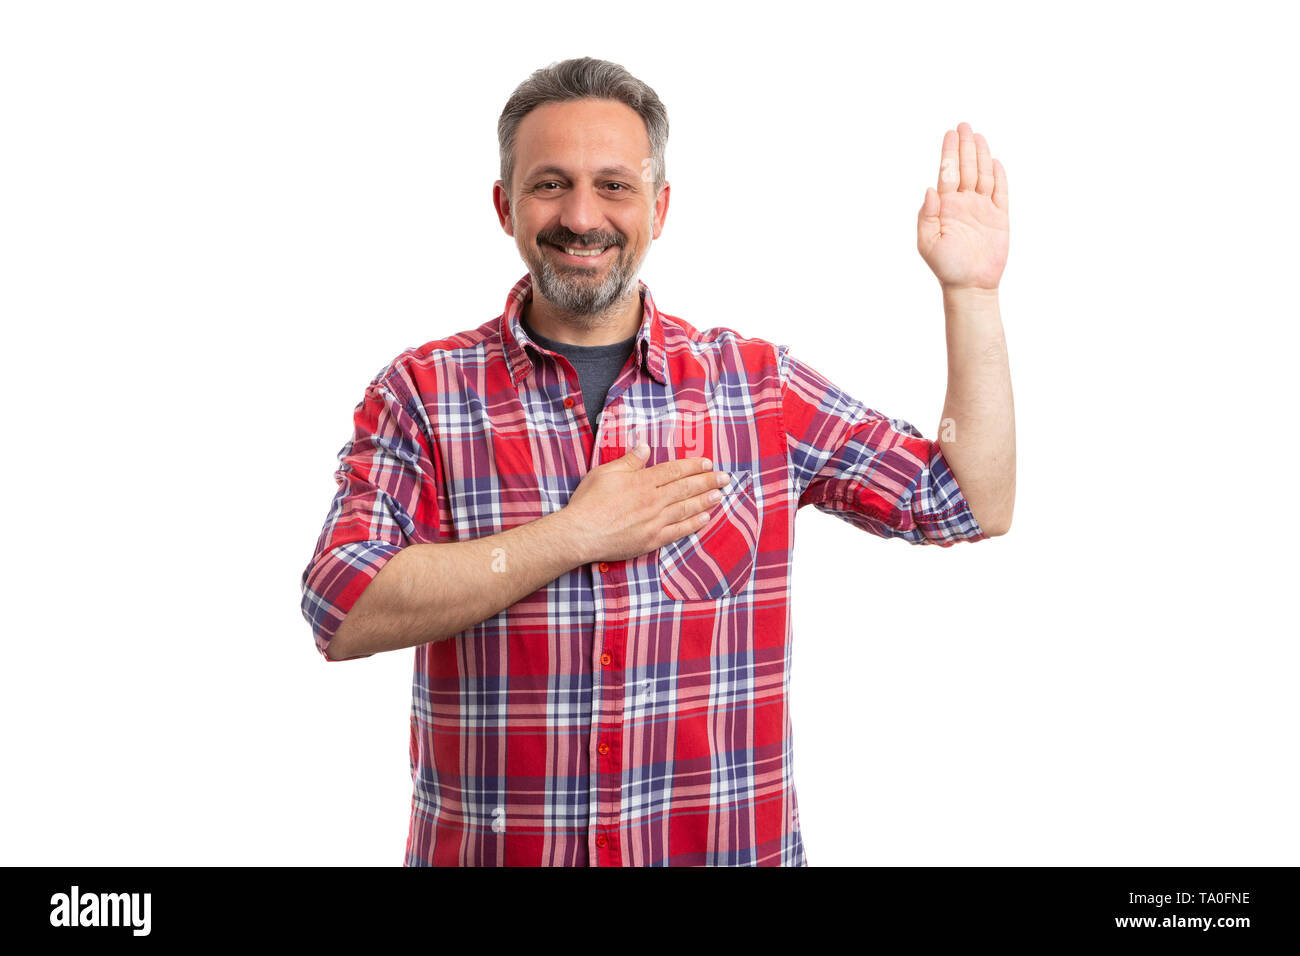 Trustworthy man making honest oath gesture with palm up and touching heart isolated on white background Stock Photo